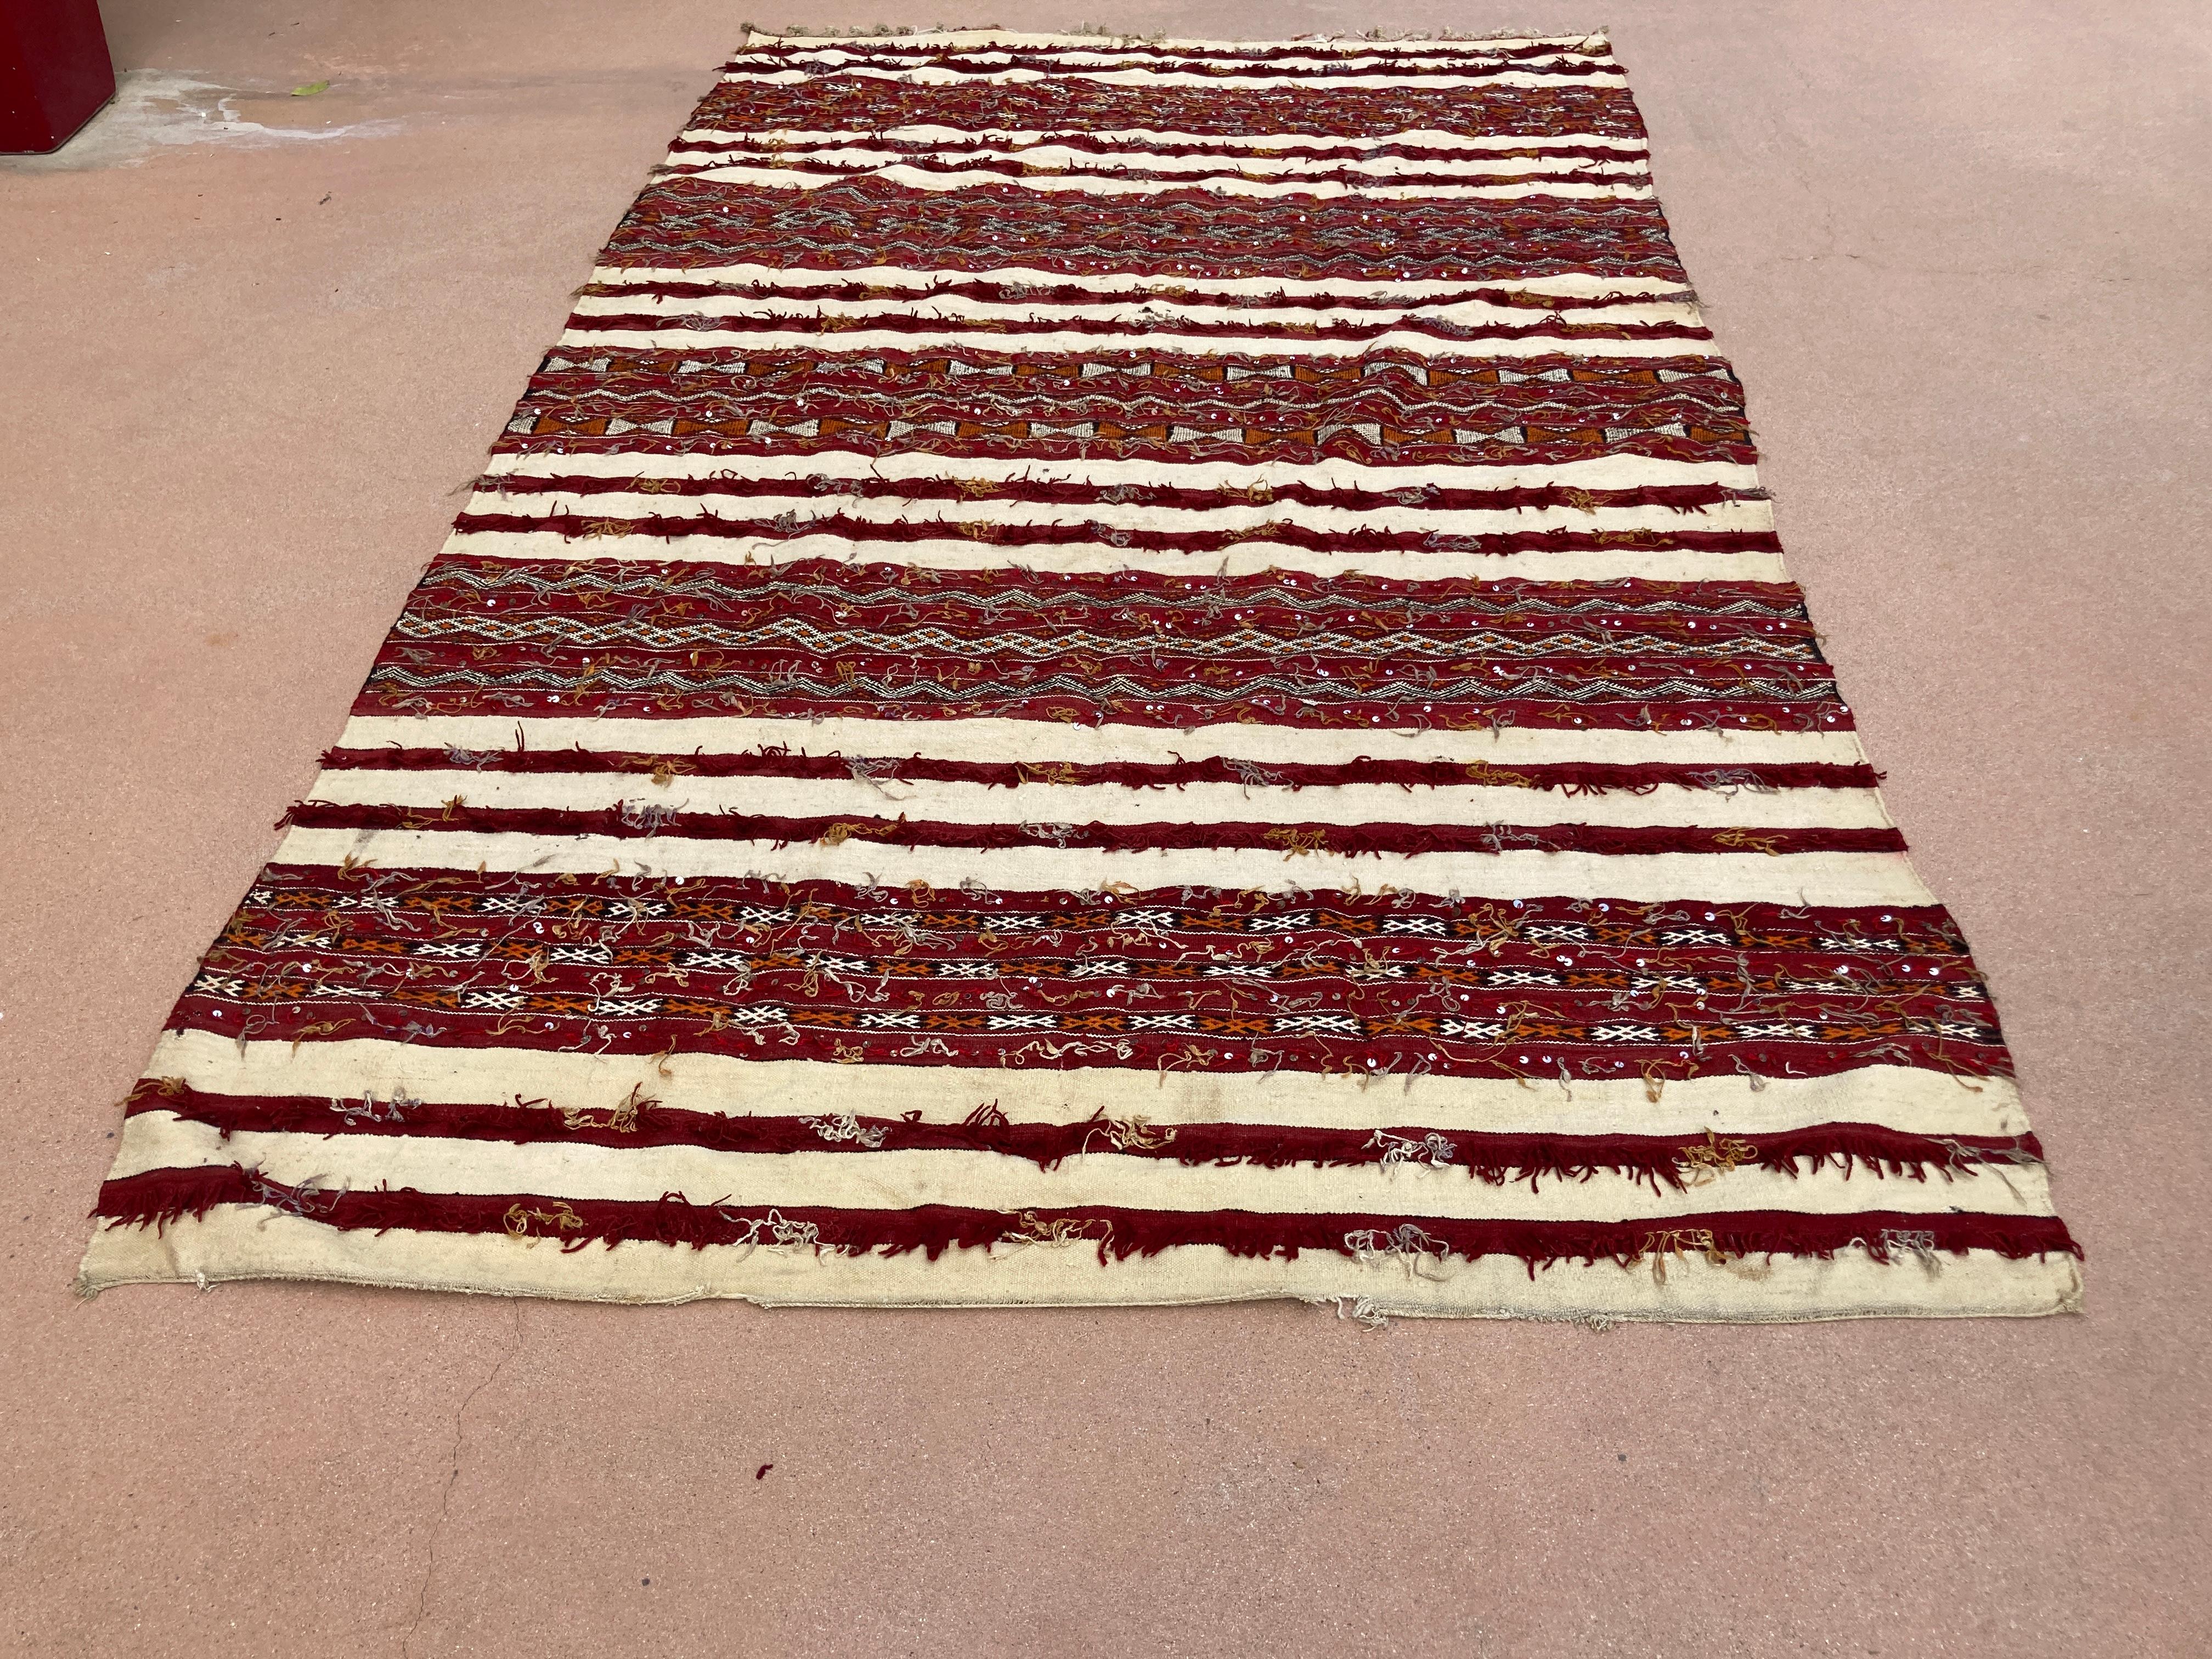 1960s authentic Handwoven vintage Moroccan Berber Tribal Handira ethnic textile.Moroccan Bohemian style rug, handwoven by the Berber women of the Zemmour tribe for their wedding day.The design on this ethnic carpet is white, red and black in